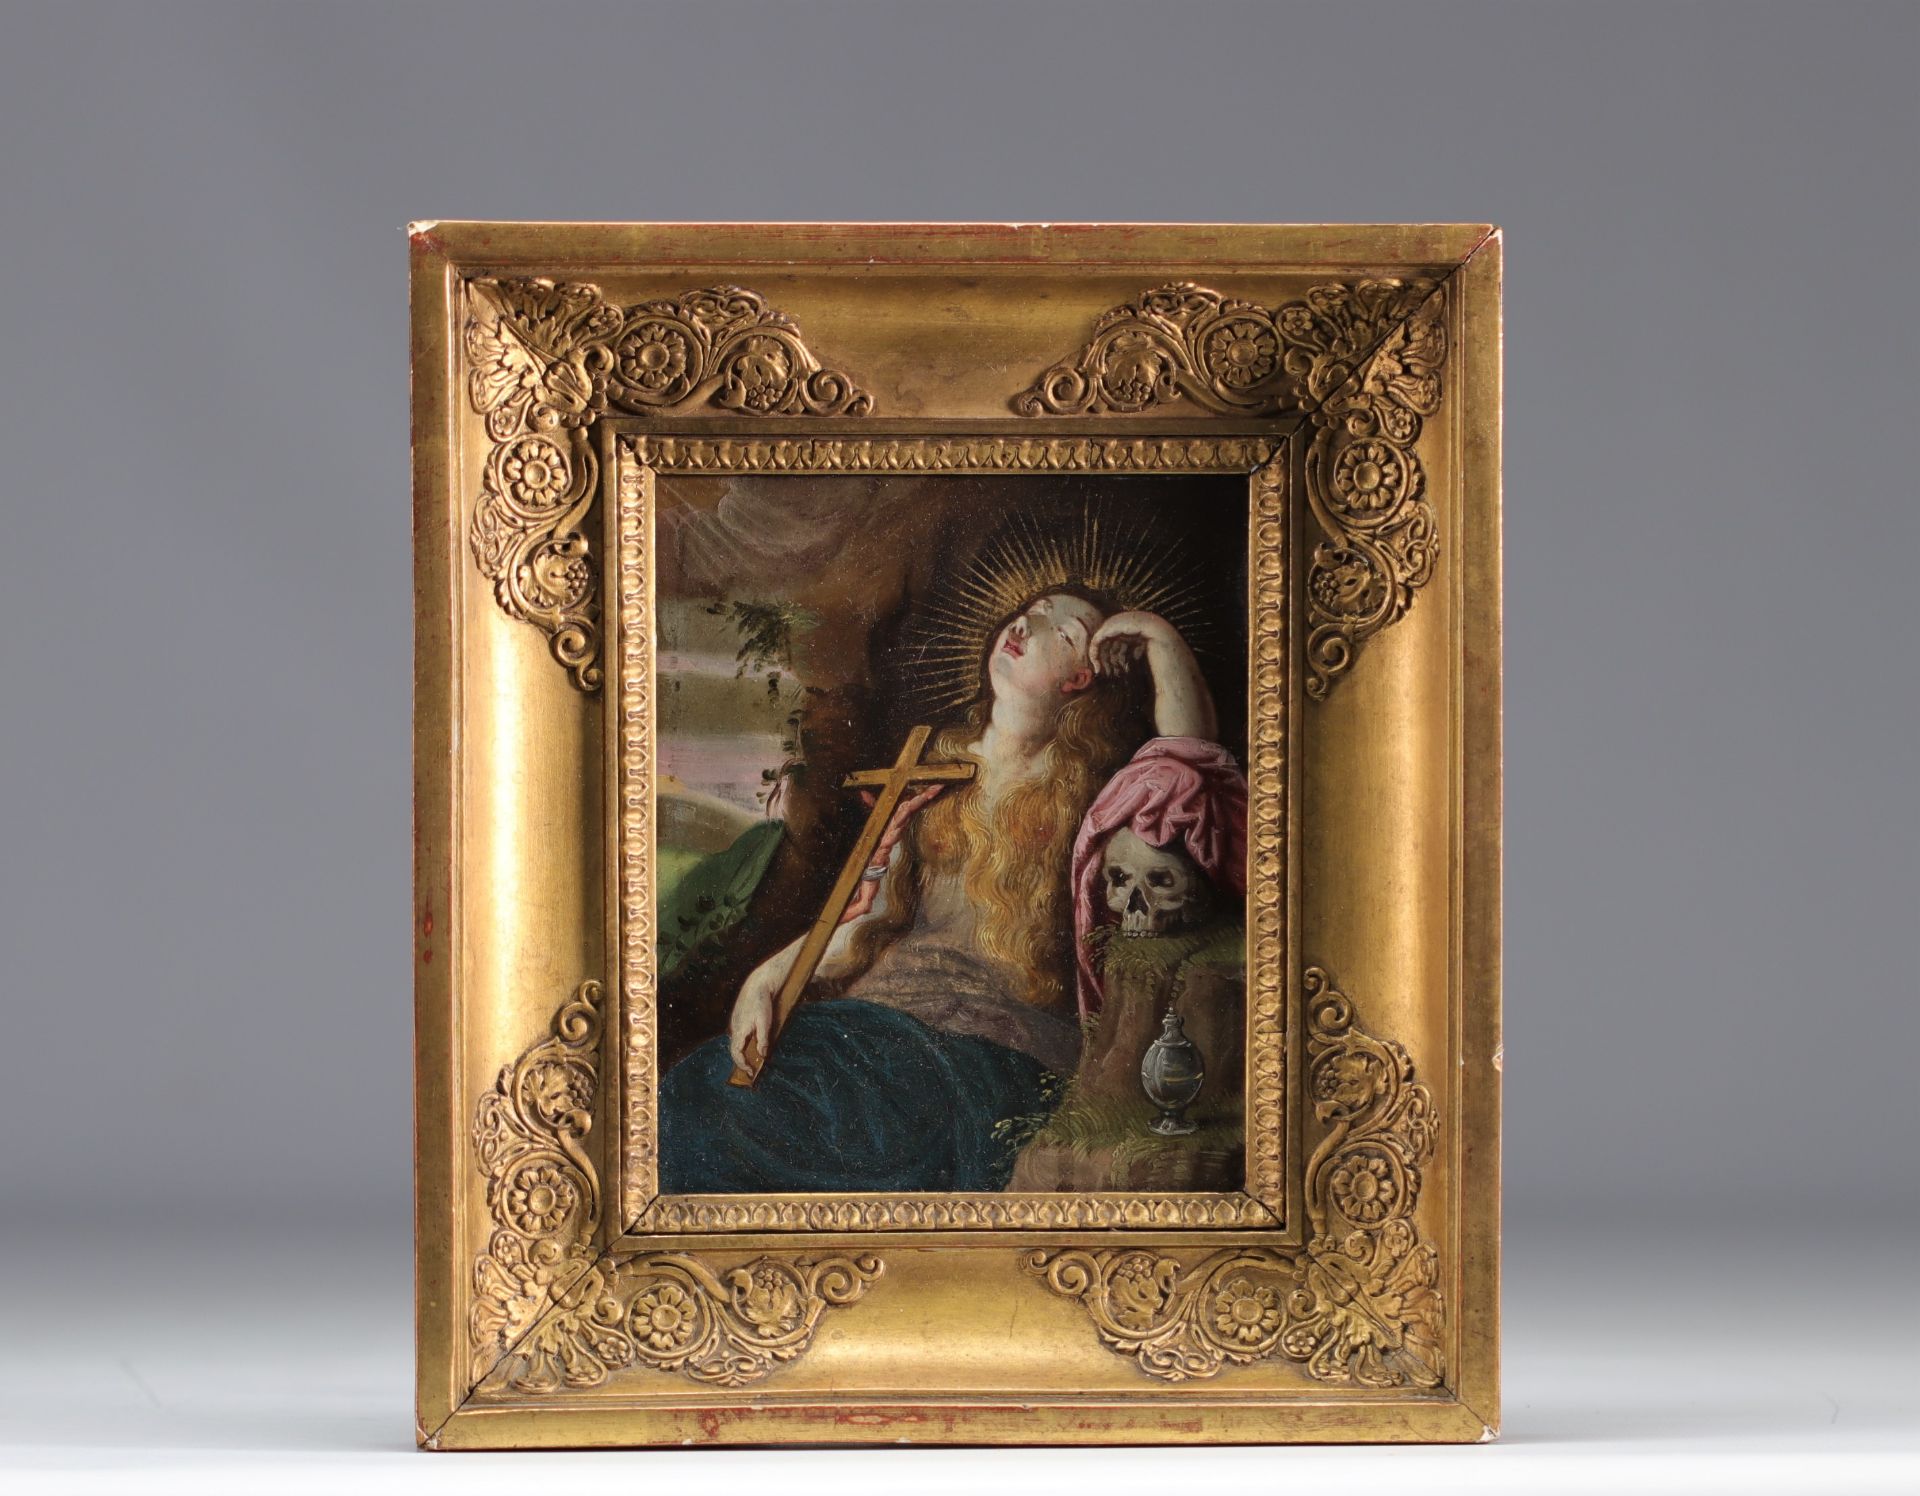 Oil on copper "Mary Magdalene" from 17th century - Image 2 of 2